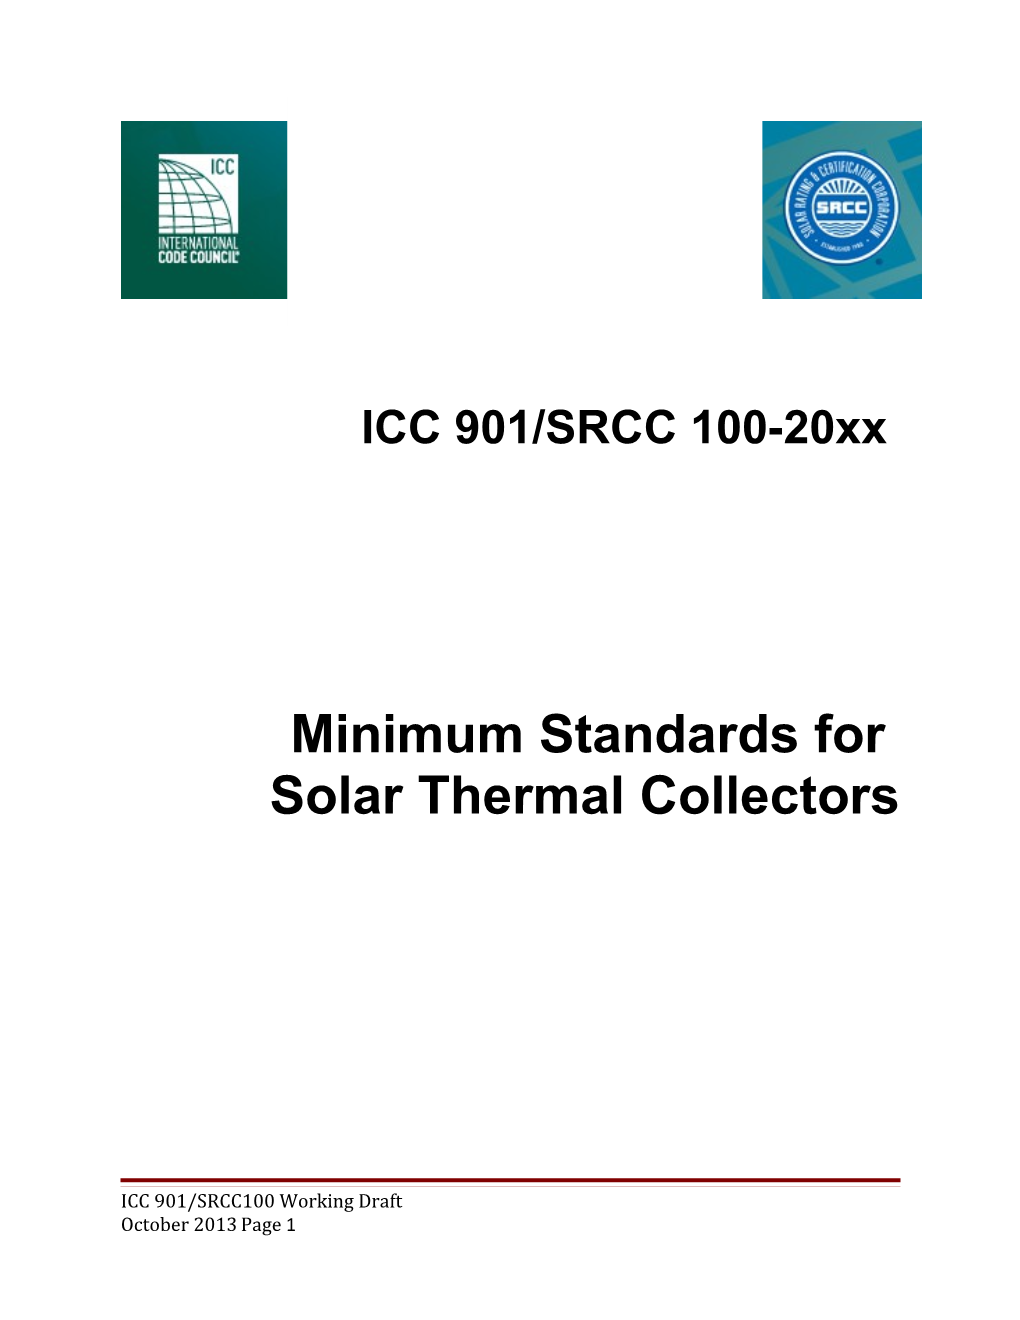 ICC 901/SRCC 100 Minimum Standards for Solar Thermal Collectors Task Group Working Draft